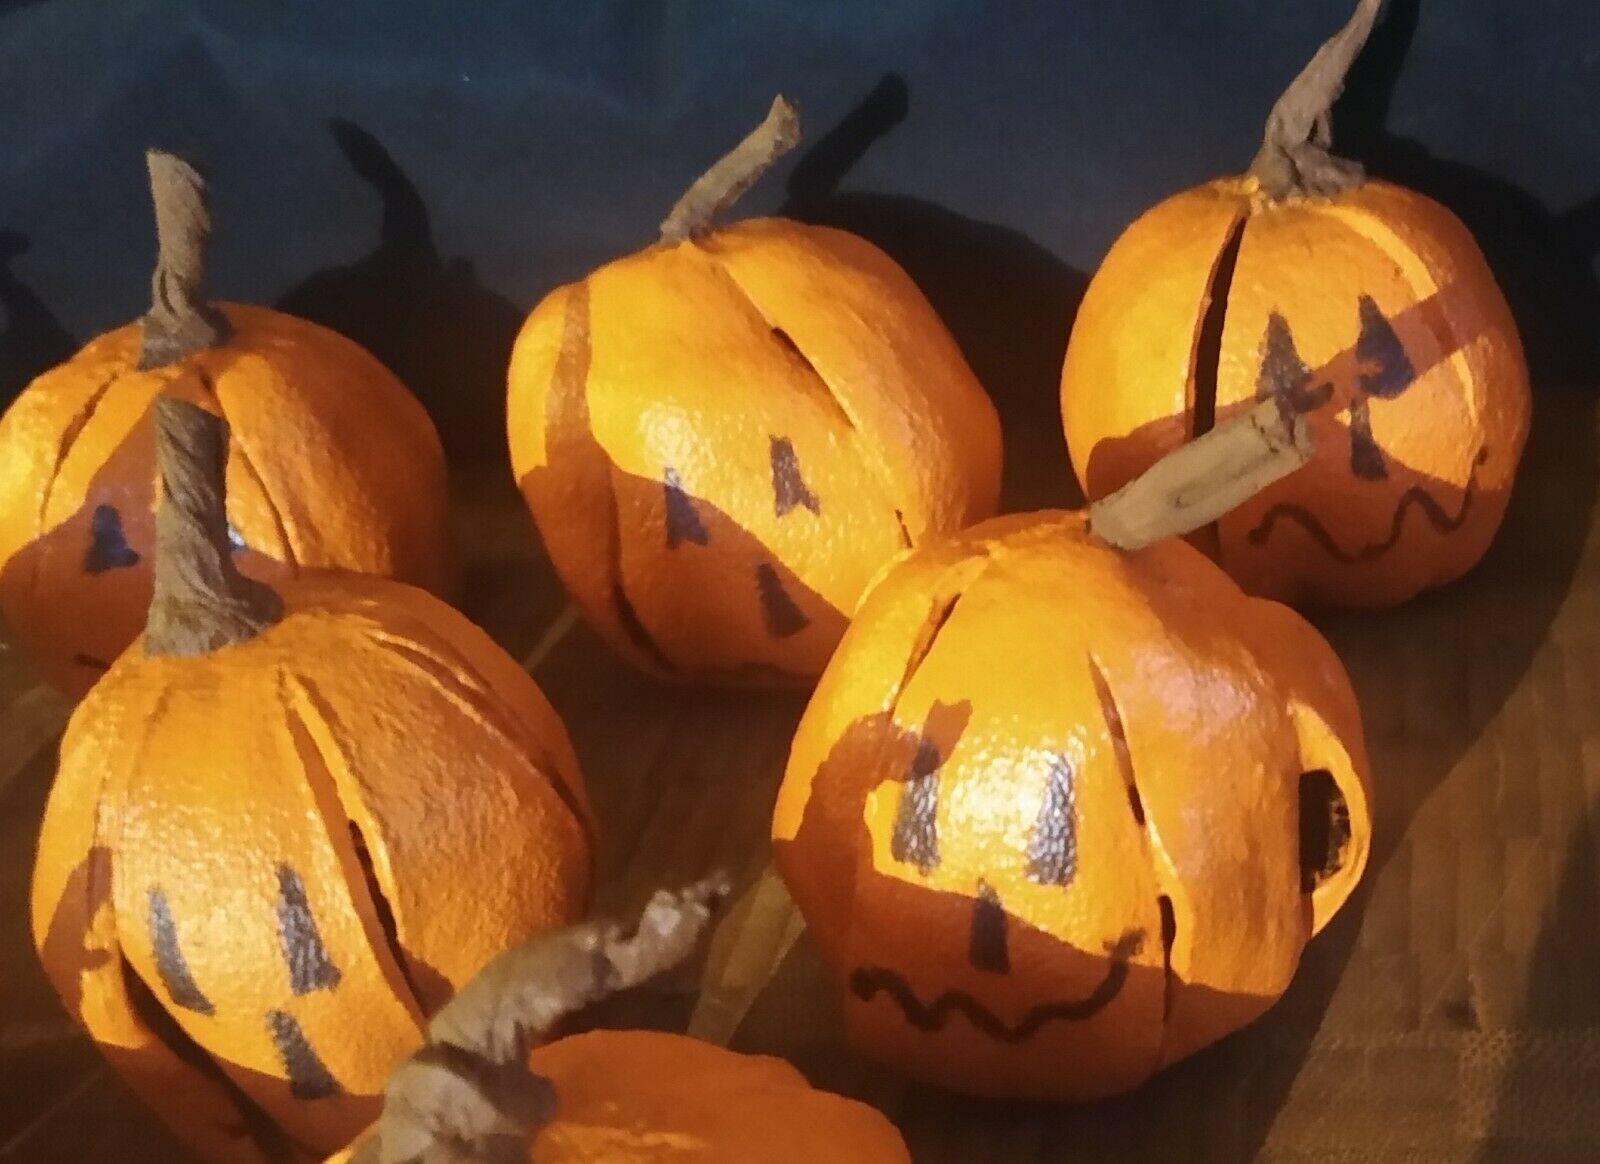 10-EACH, DRIED MINI PUMPKIN JACK O LANTERNS. HAND MADE FROM DRIED CLEMINTINES